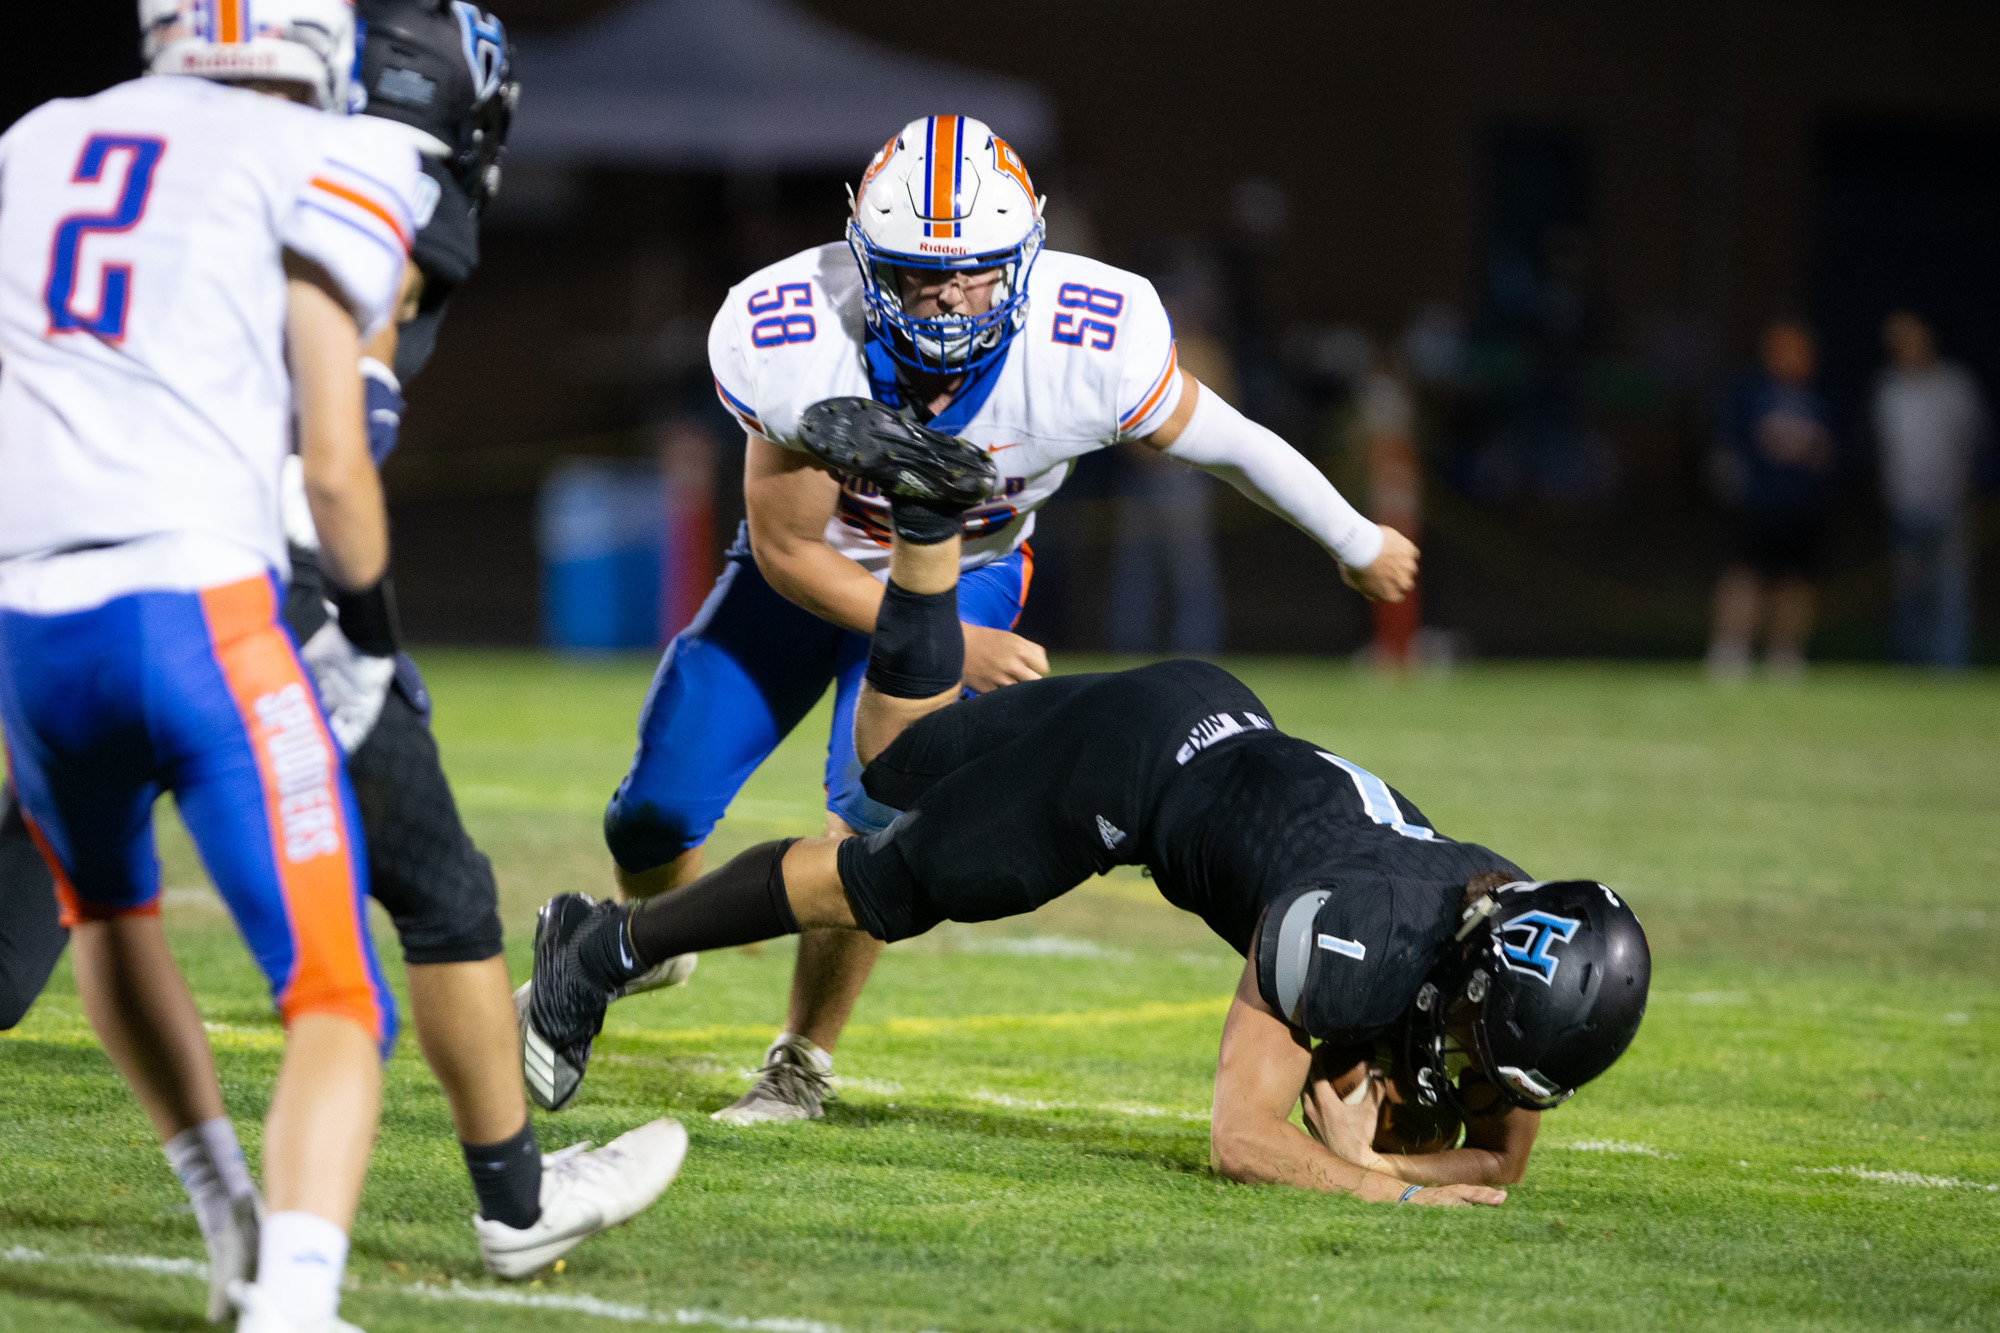 Hockinson Hawks Andre Northrup (1) is thrown to the ground in a tackle by Ridgefield Spudders Wyatt Bartroff (58) in the 2A Greater St. Helens League season opener for both teams at Hockinson High School on Friday, Sept. 17, 2021. (Randy L.